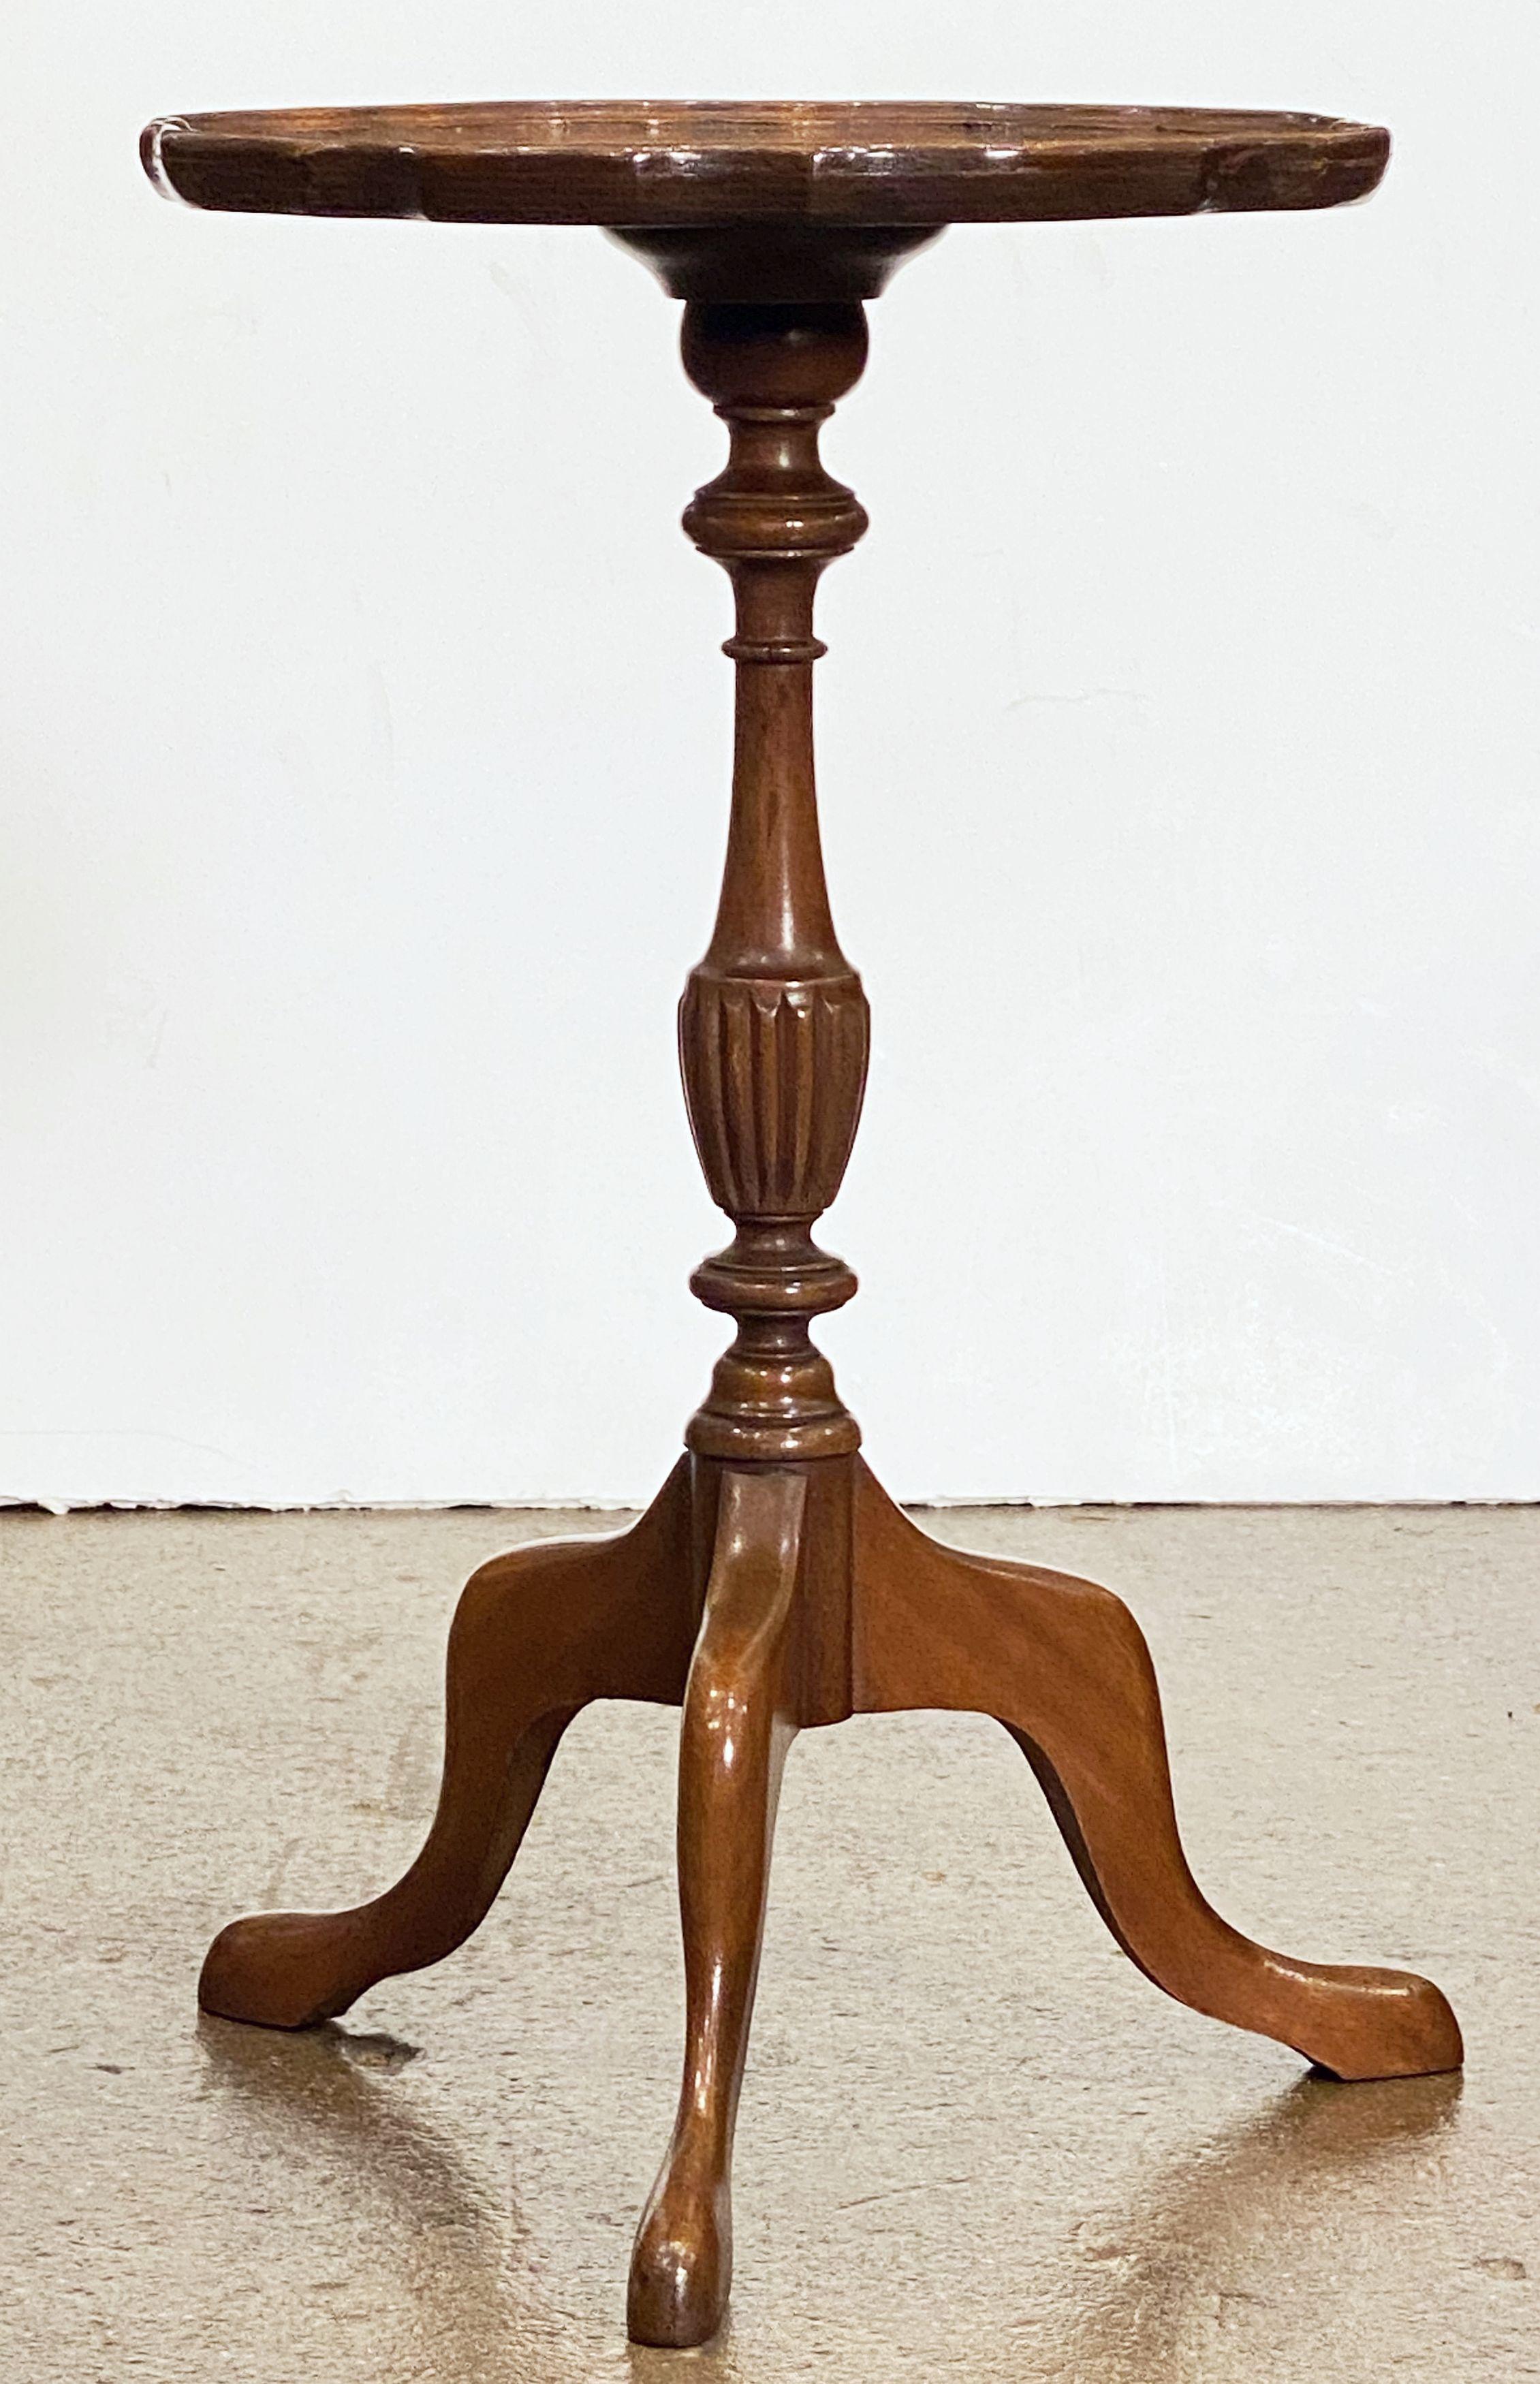 An English wine table of burled walnut, featuring a raised edge around the circumference of the scalloped top, mounted upon a turned column pedestal with tripod base.

An excellent choice as a side table or for serving.

Table Top diameter: 12